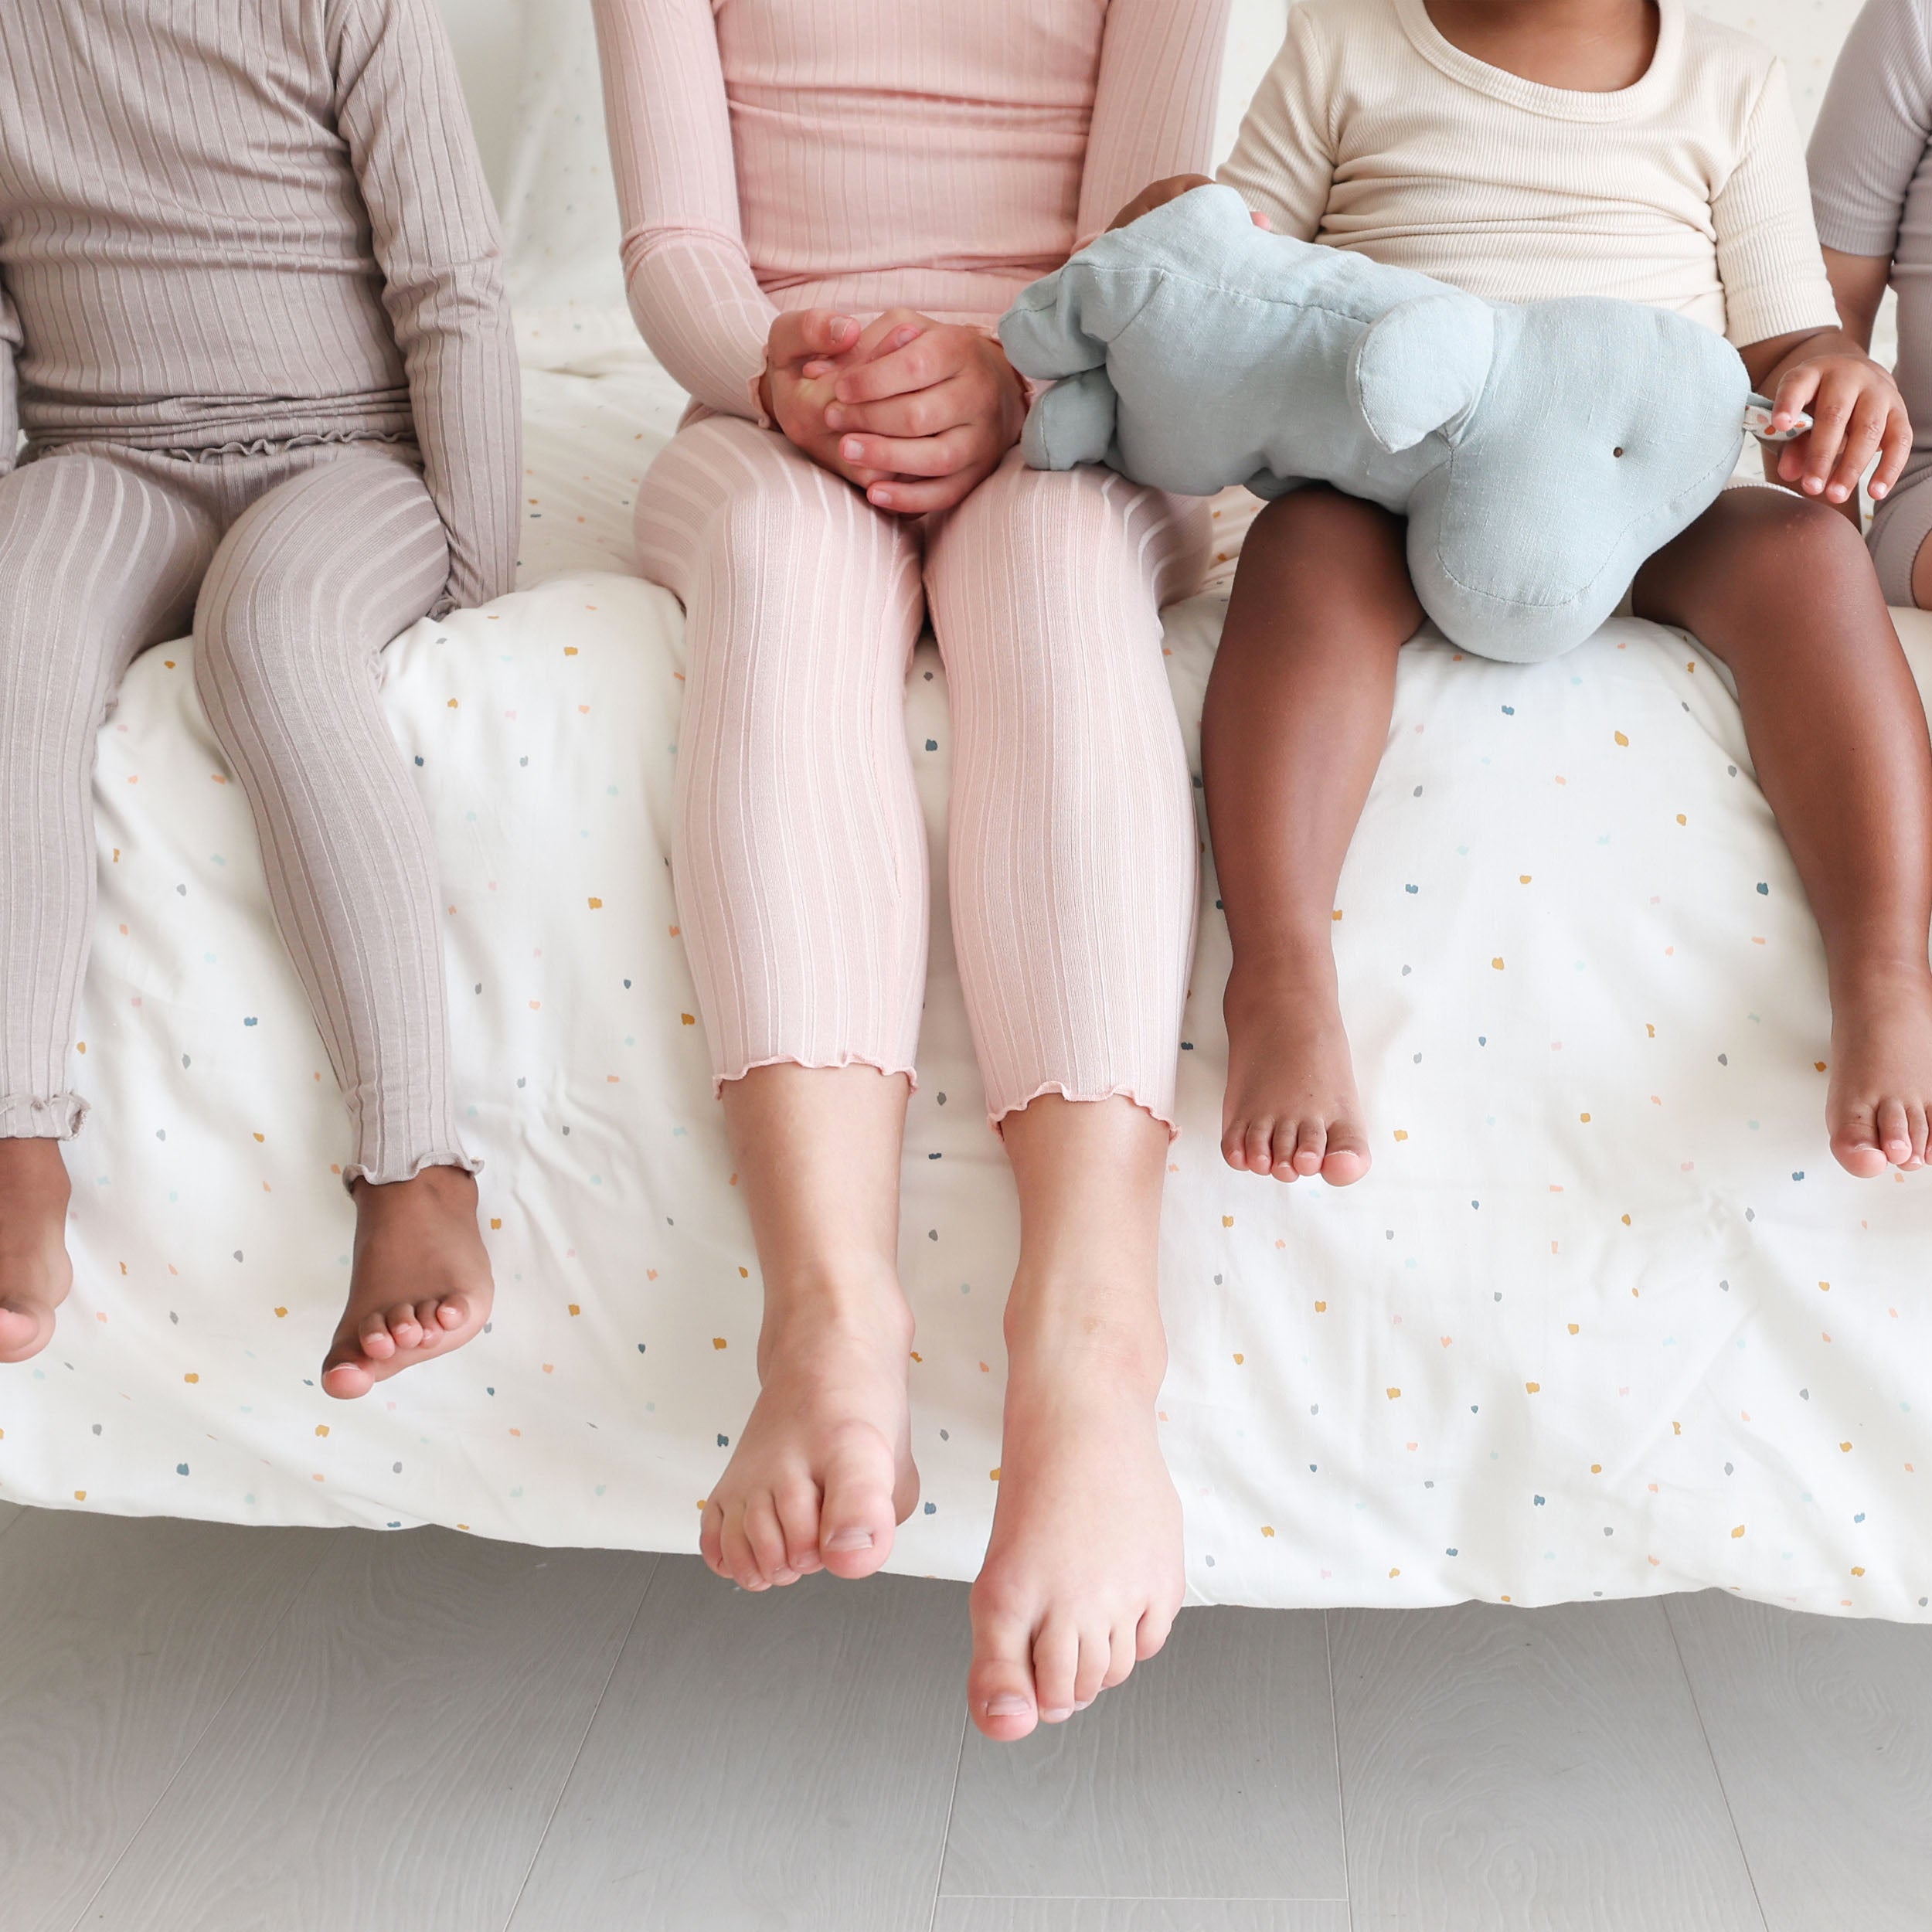 Three children sit side by side on a bed, showing only their lower bodies. they wear pajamas; the middle child holds a blue elephant plush toy. the bedspread is white with colorful dots using the Makemake Organics Organic Cotton Sheet Set - Dotty.